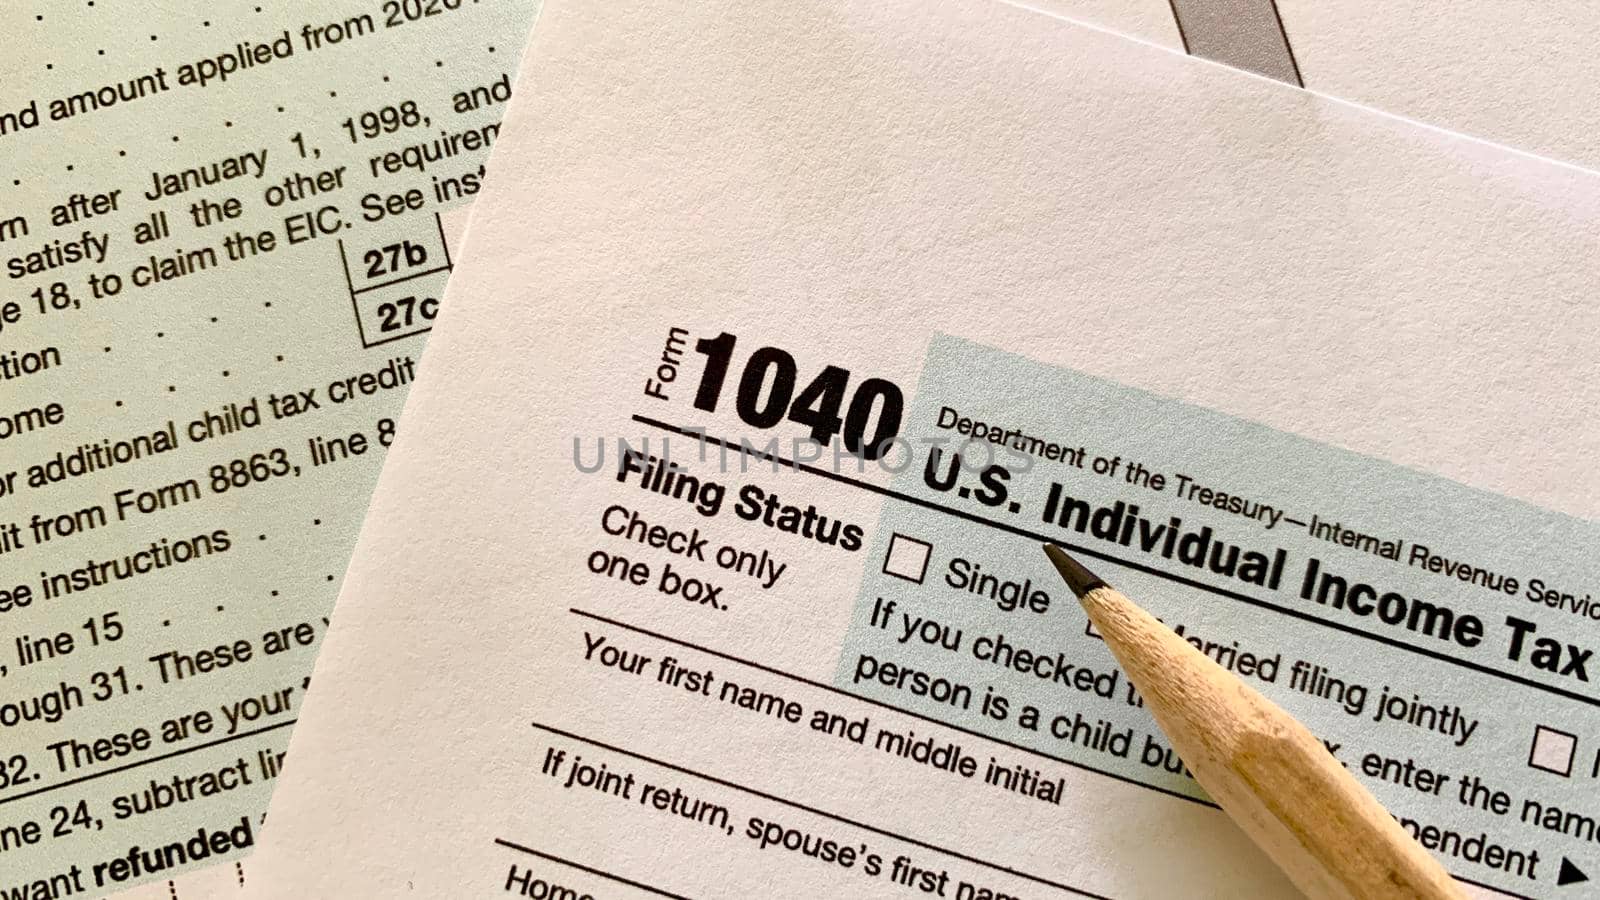 1040 US individual tax form with pencil.